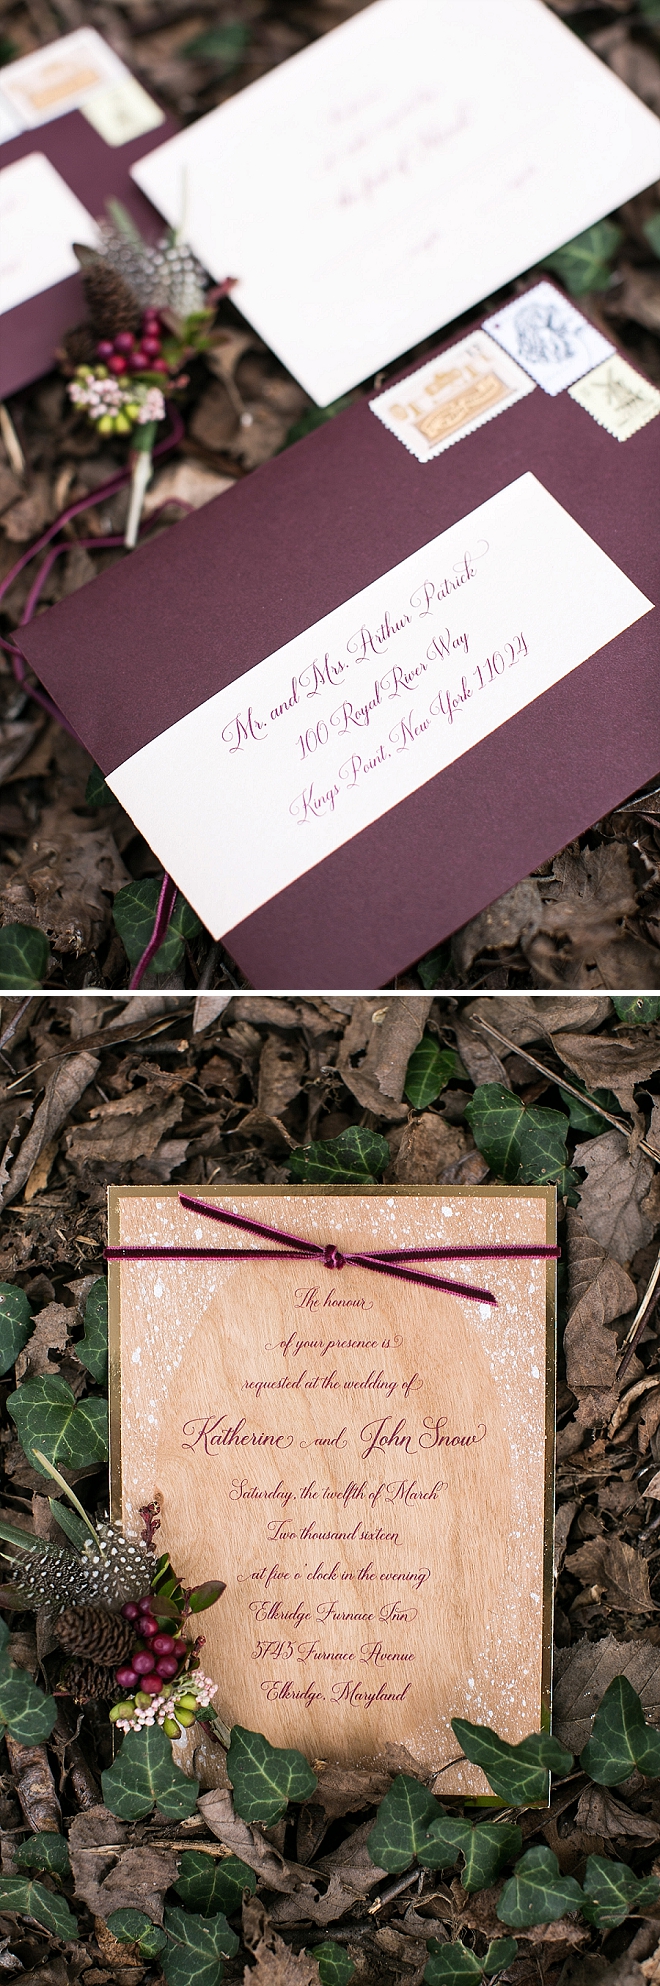 We love these stunning wooden invitations at this styled Snow White wedding!